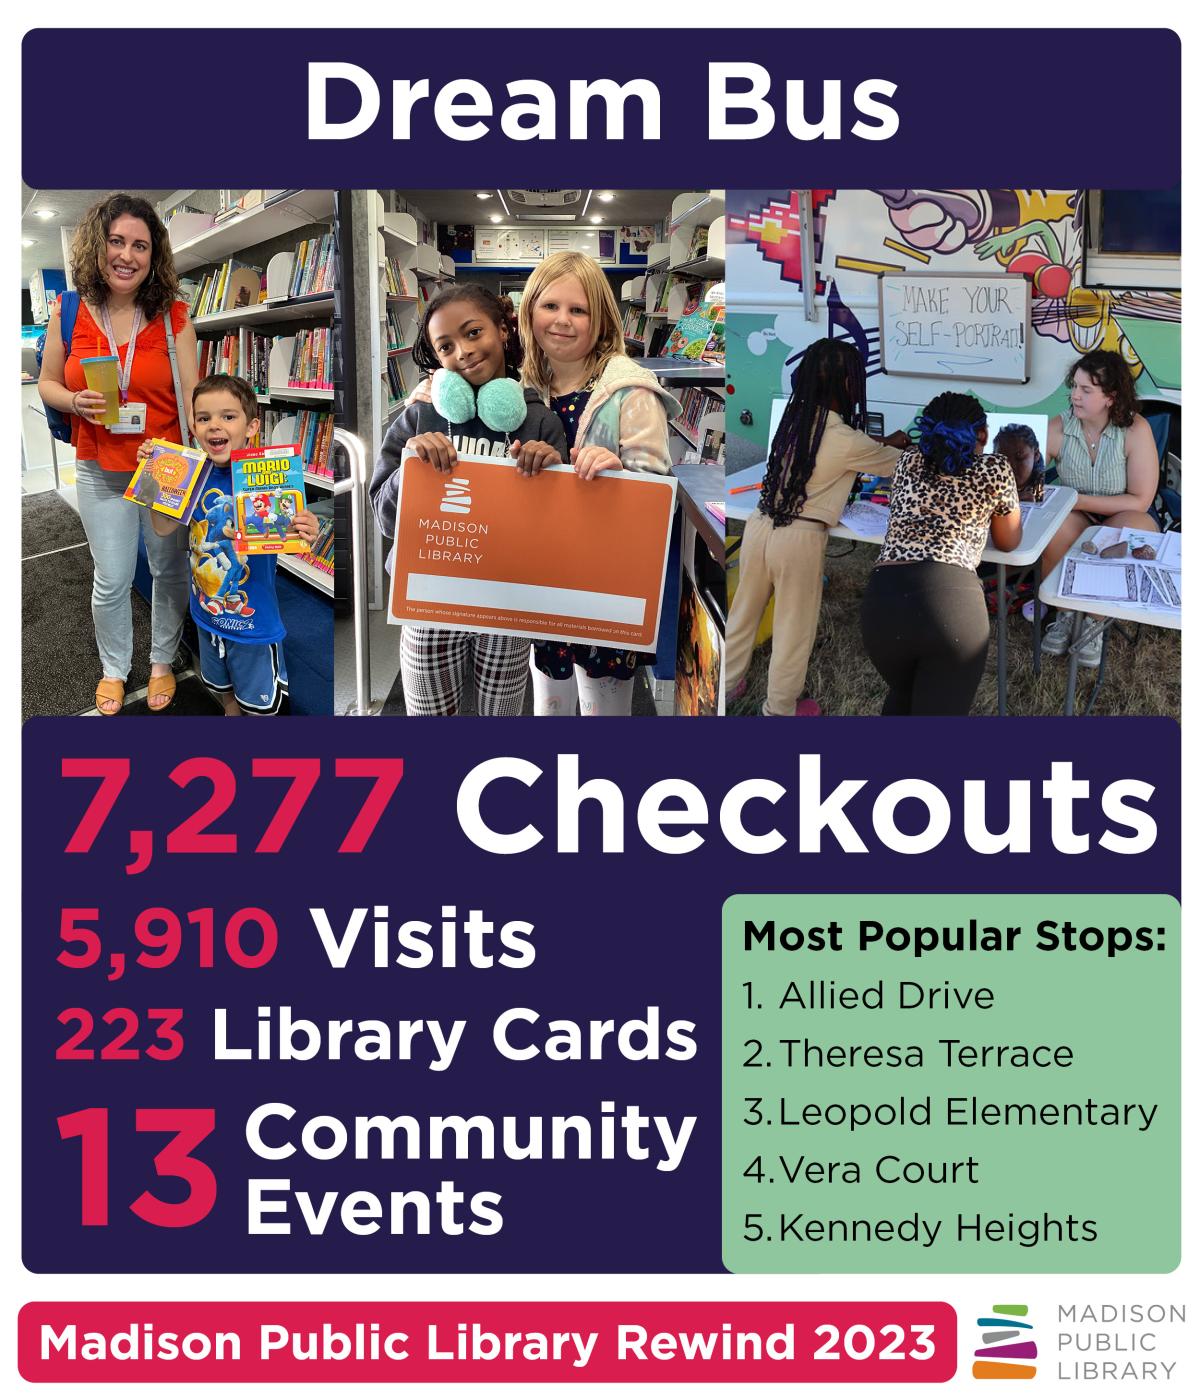 Madison Public Library Year in Review 2023 Dream Bus numbers